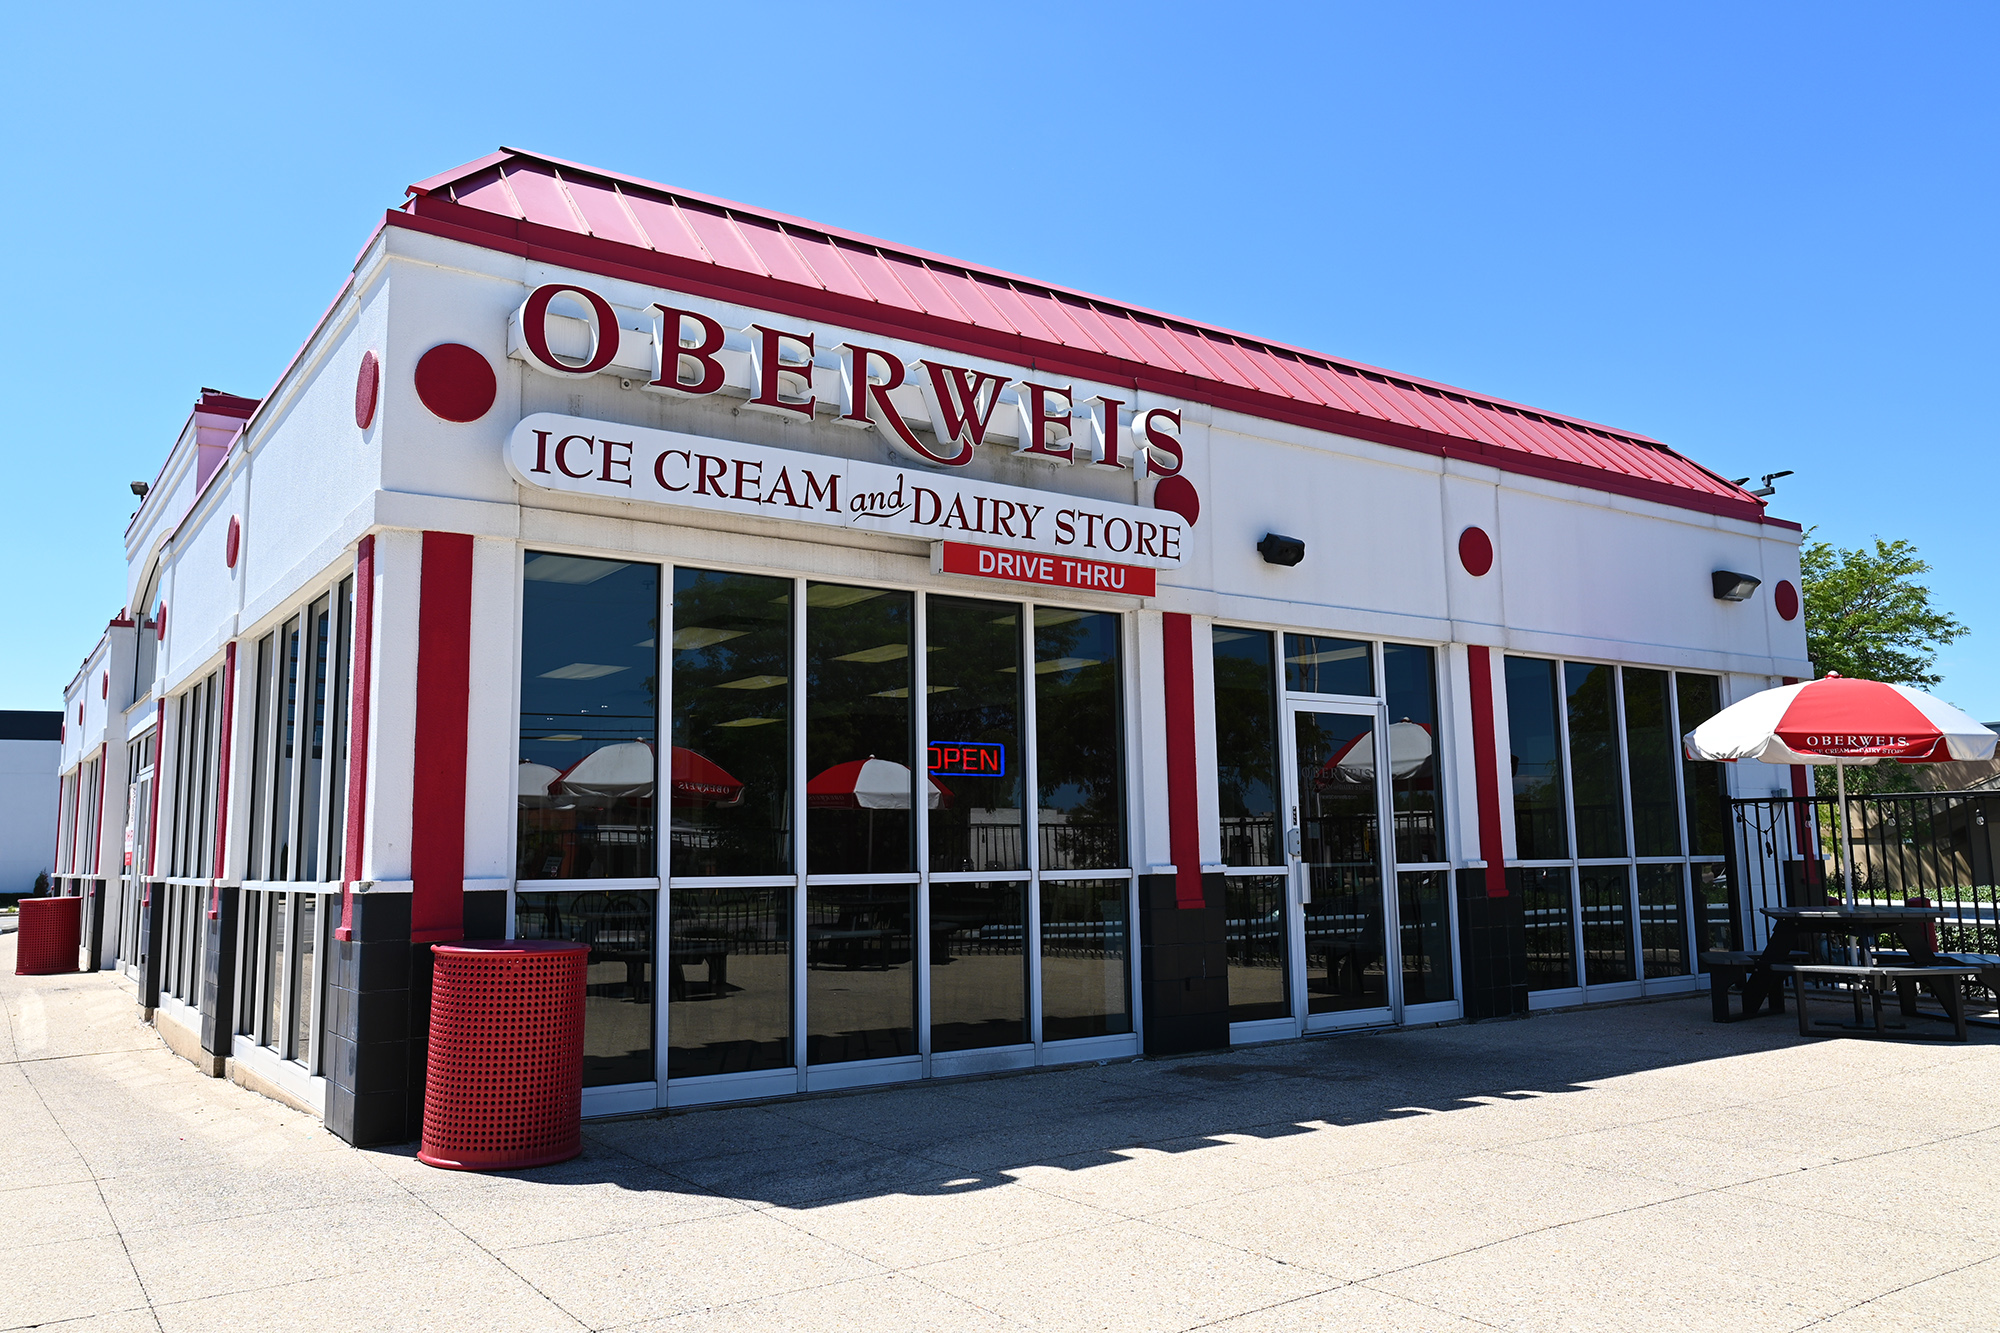 Oberweis Dairy Navigates Financial Restructuring: A Closer Look at Its Chapter 11 Filing and Future Plans